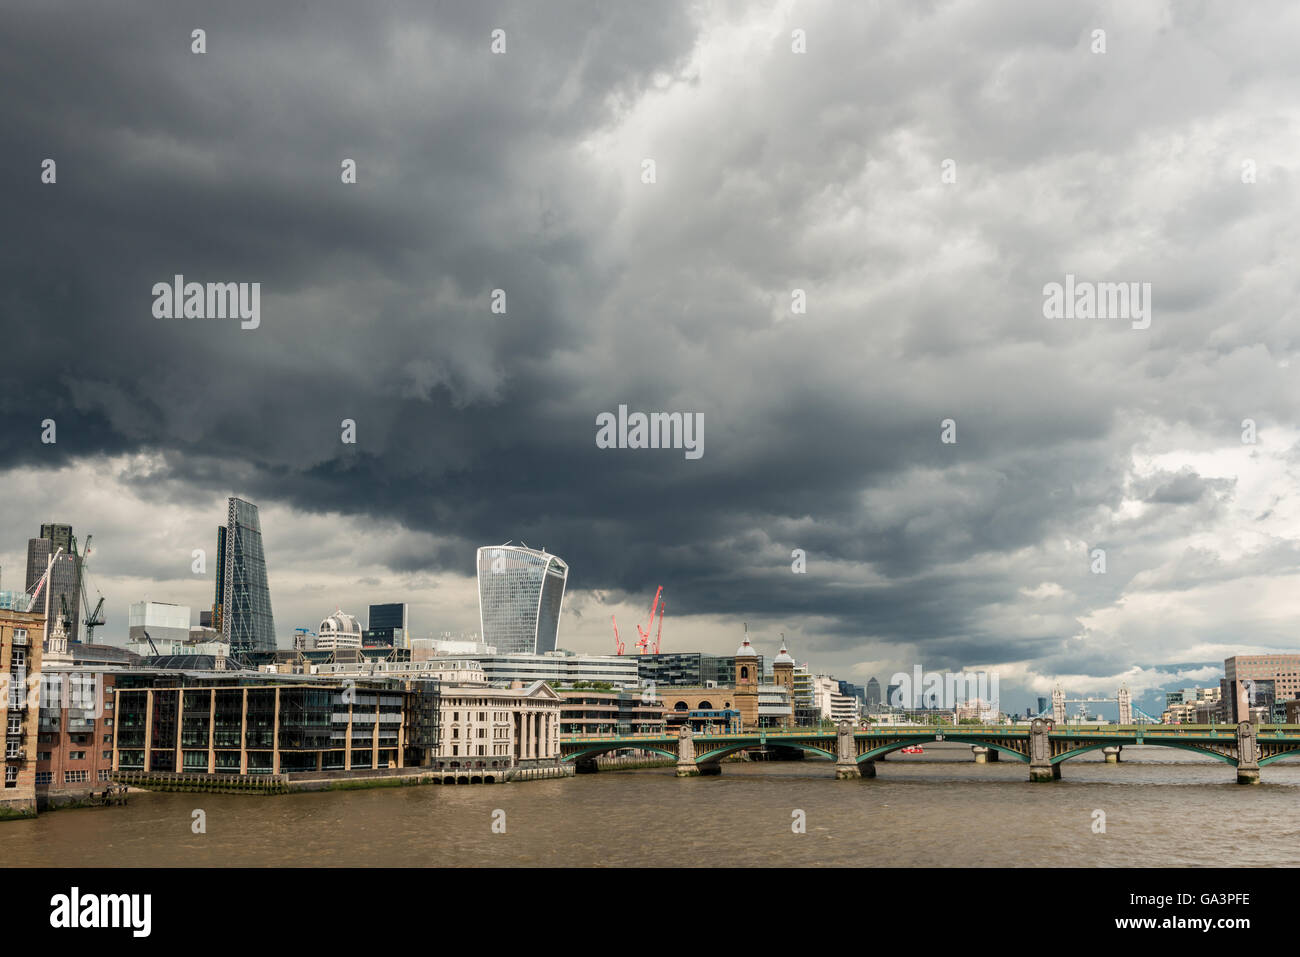 London, United Kingdom - June 25, 2016: London Skyline with moody sky seconds before a storm, with Southwark bridge Stock Photo